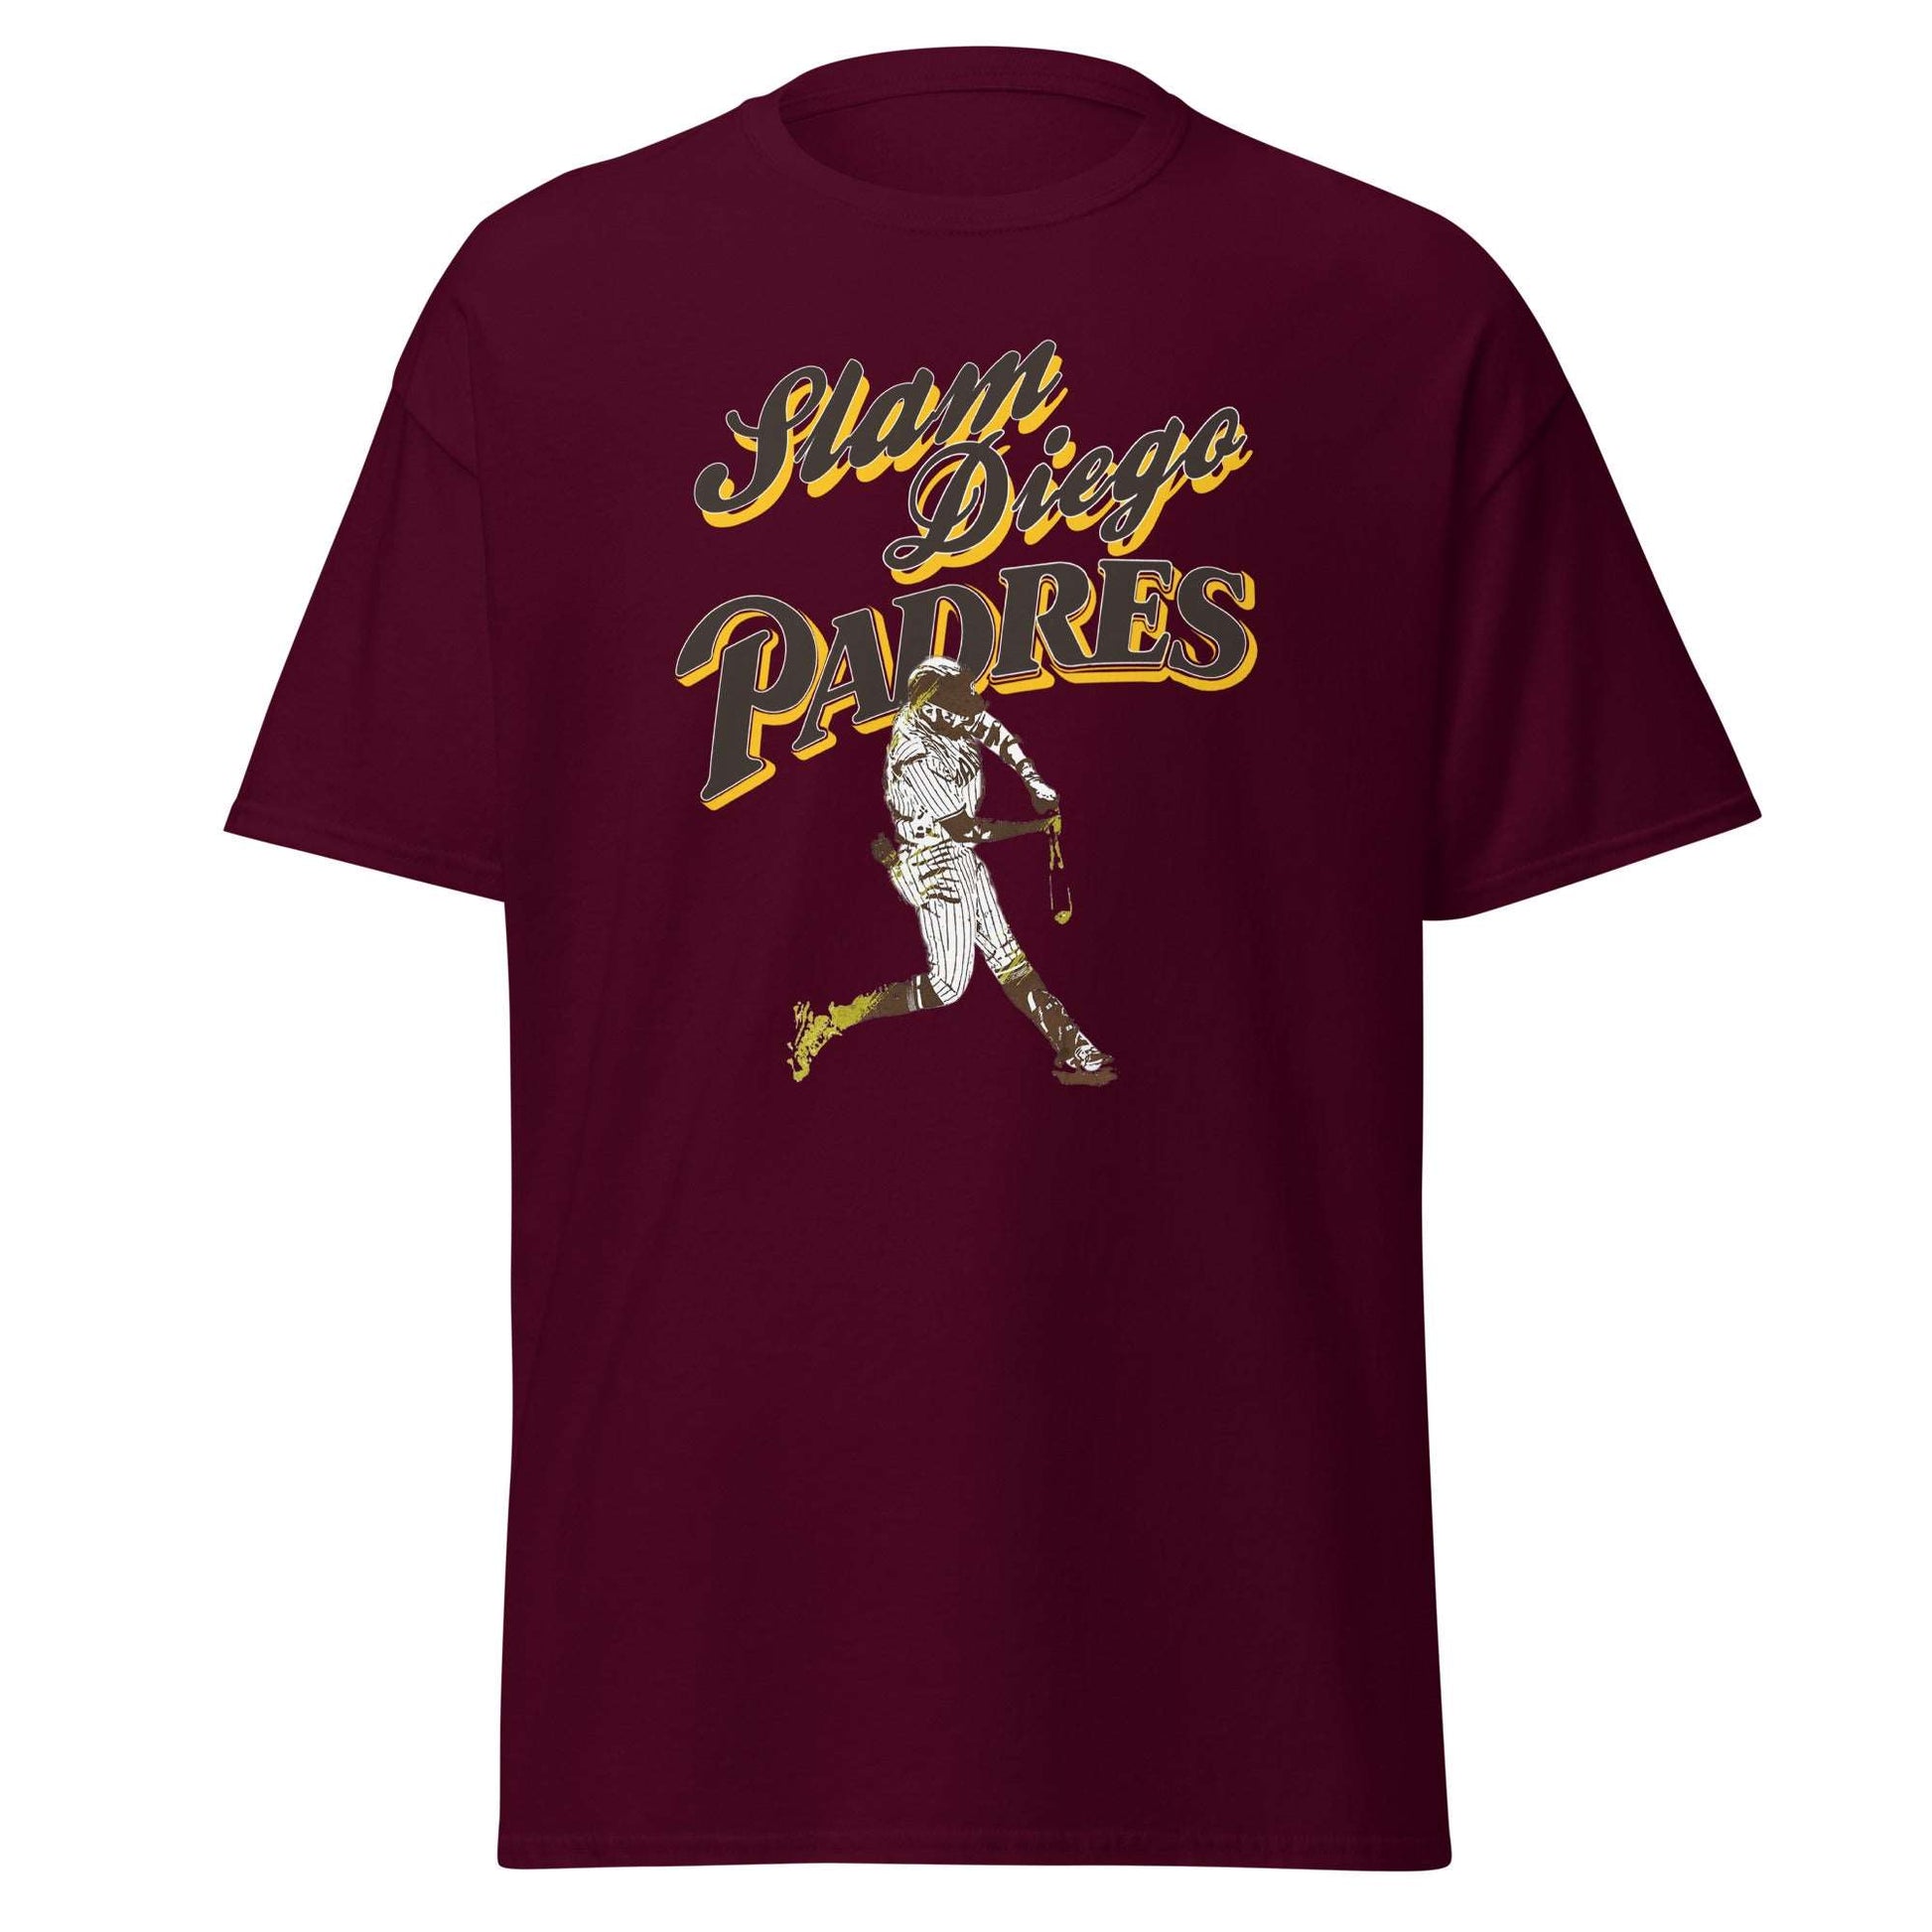 Slam Diego Padres T-Shirts for Sale